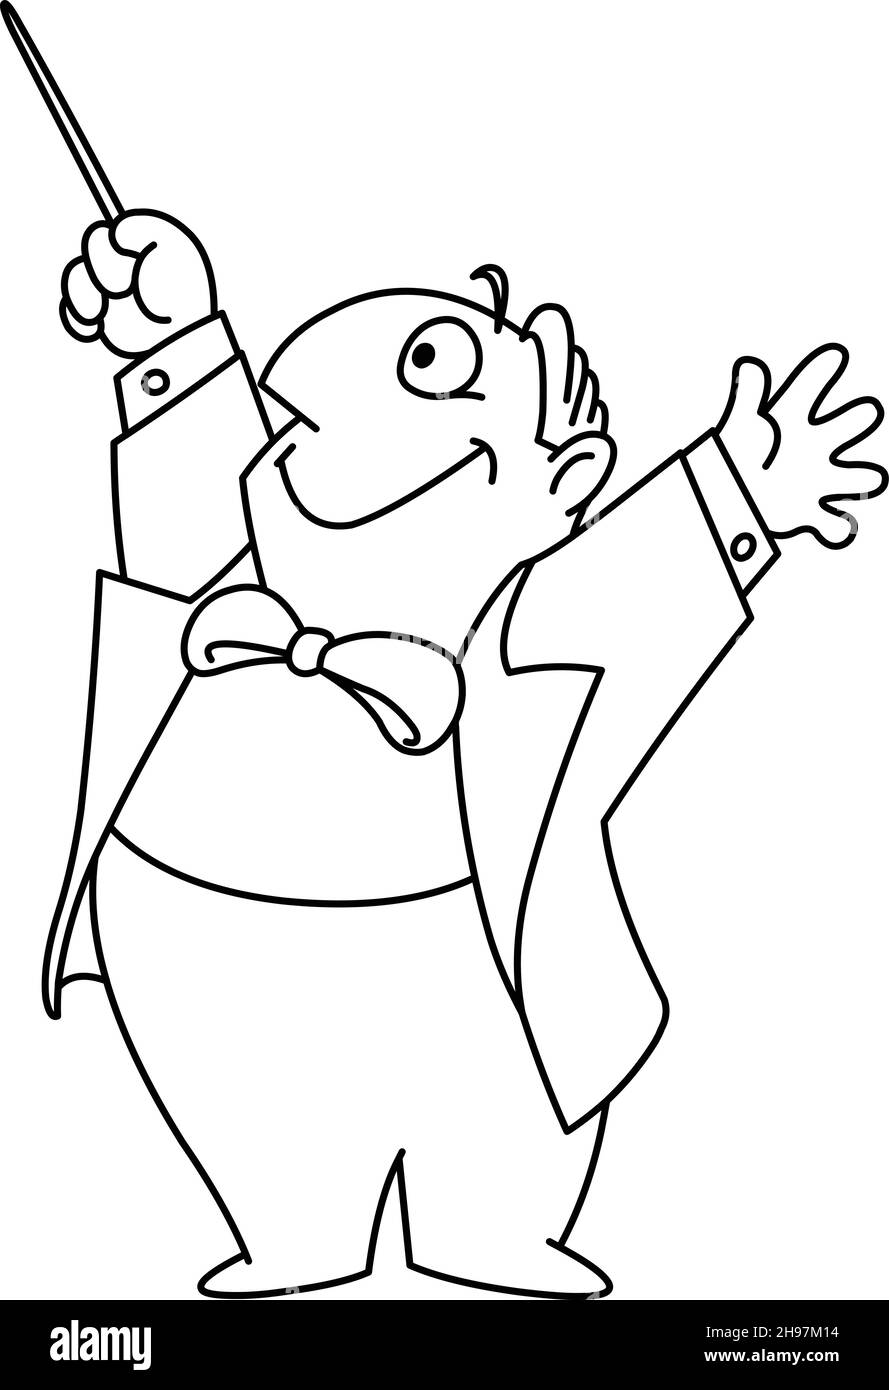 Happy chubby music conductor composer man holding his arms and baton up. Vector line art illustration coloring page. Stock Vector